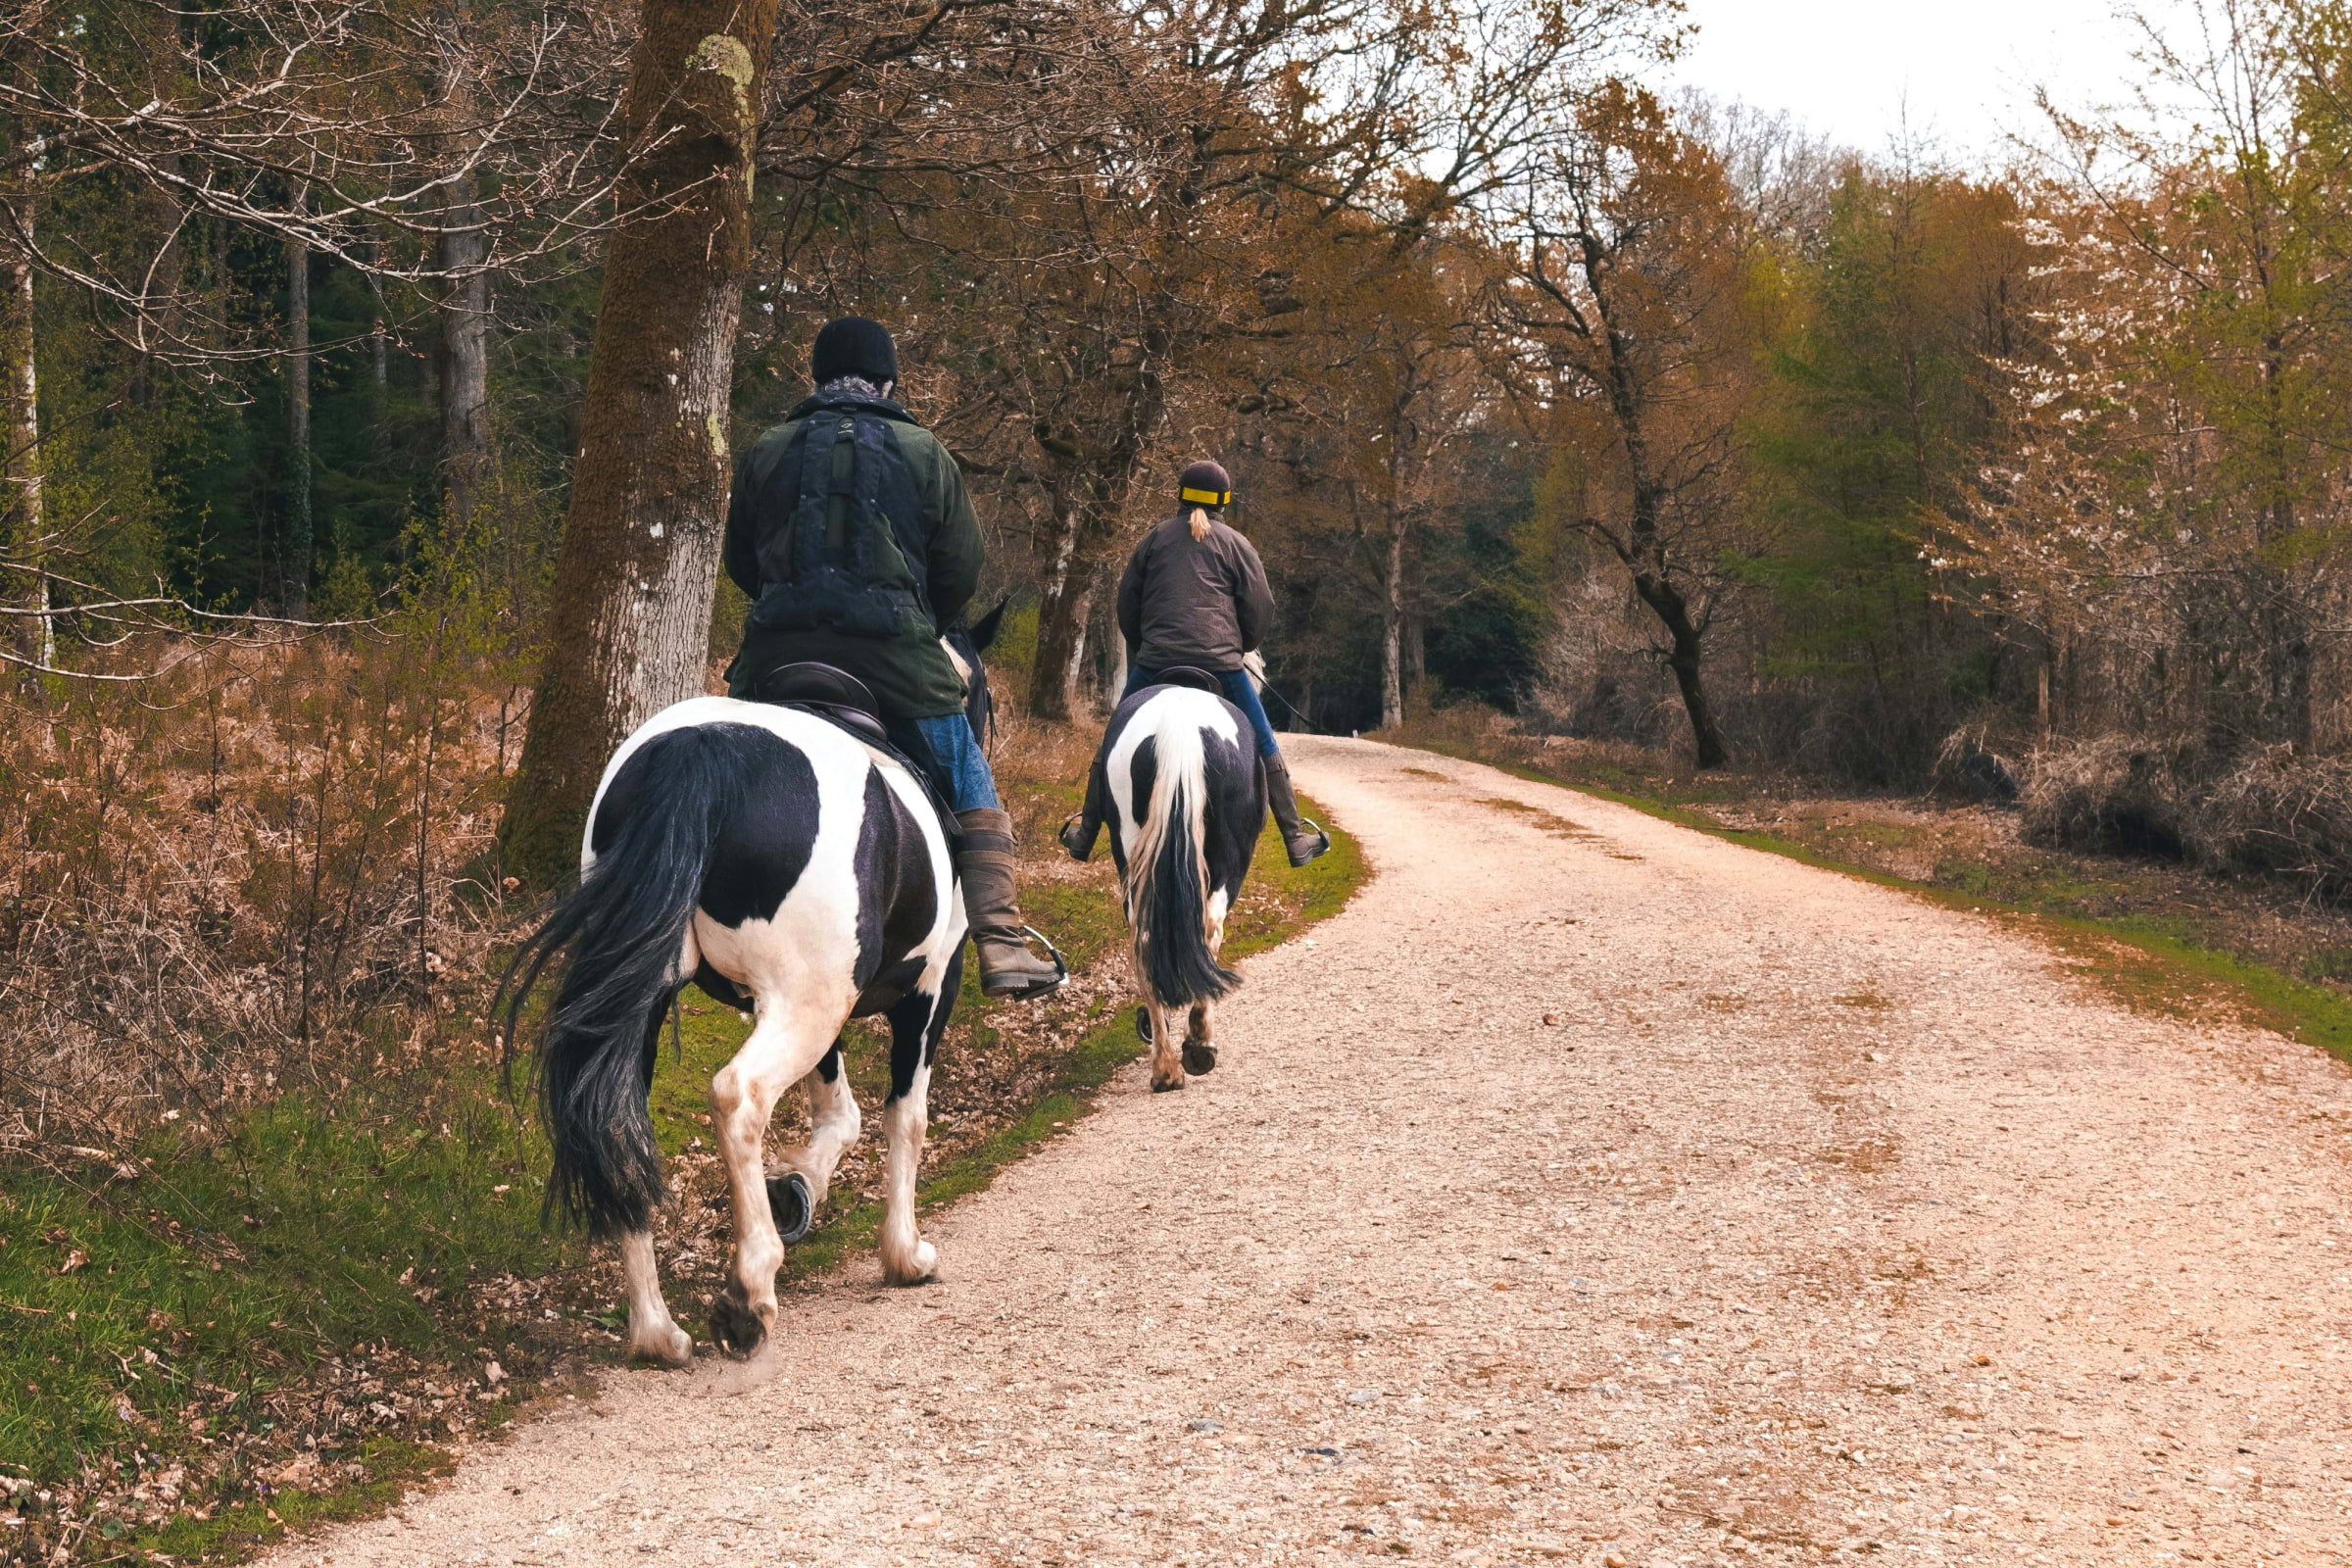 Two people riding horses along a path surrounded by trees